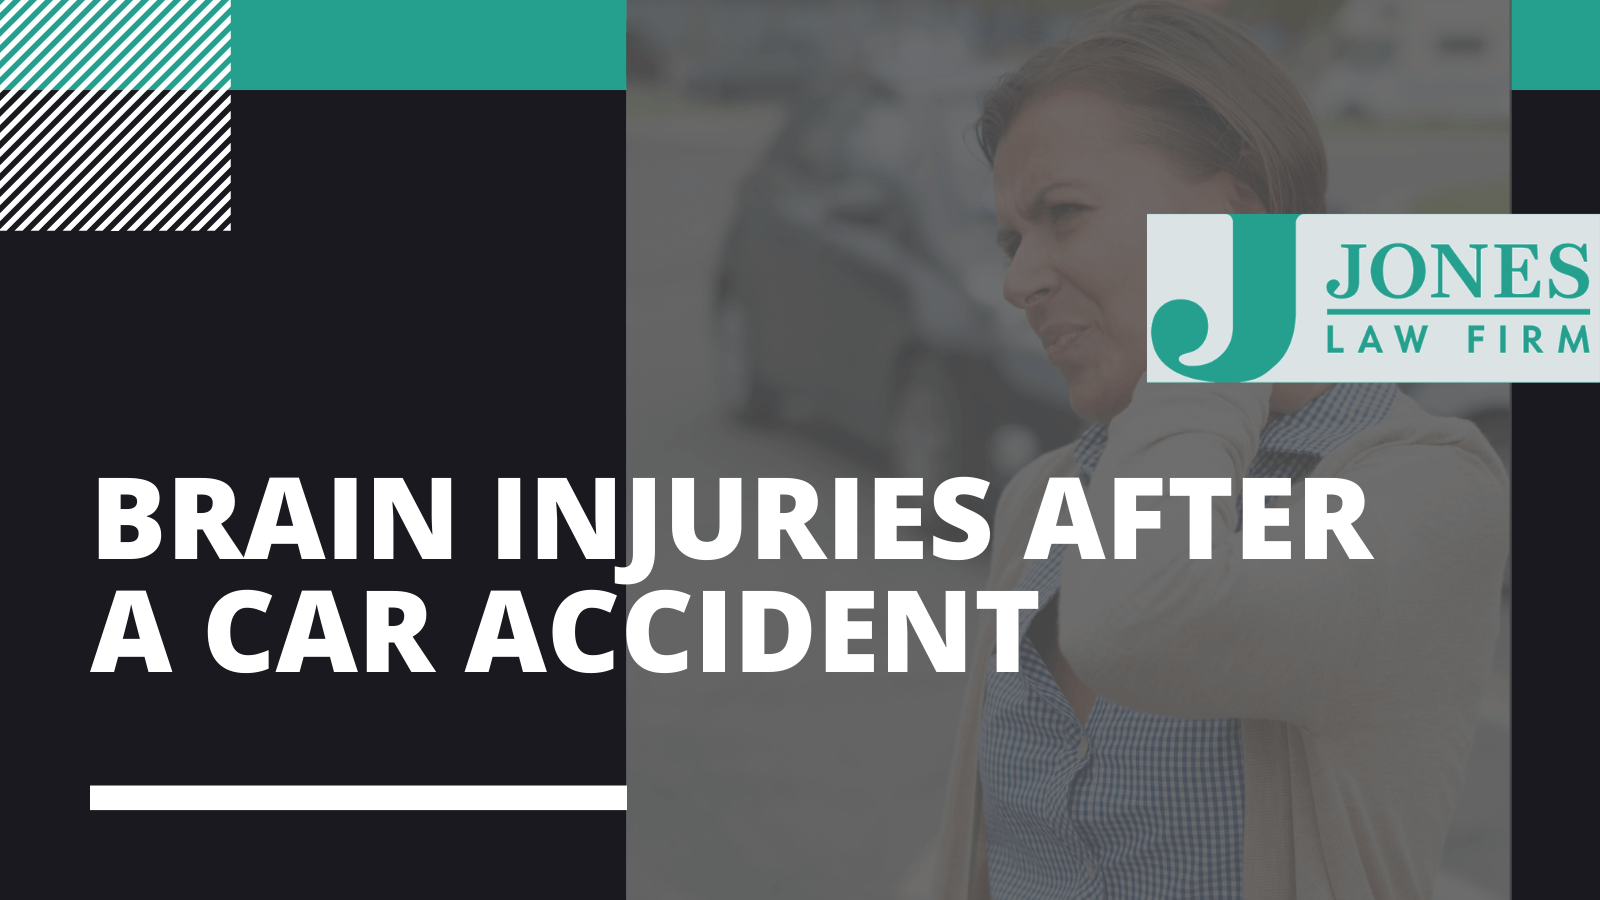 Brain Injuries after a car accident - Jones law firm - Alexandria louisiana